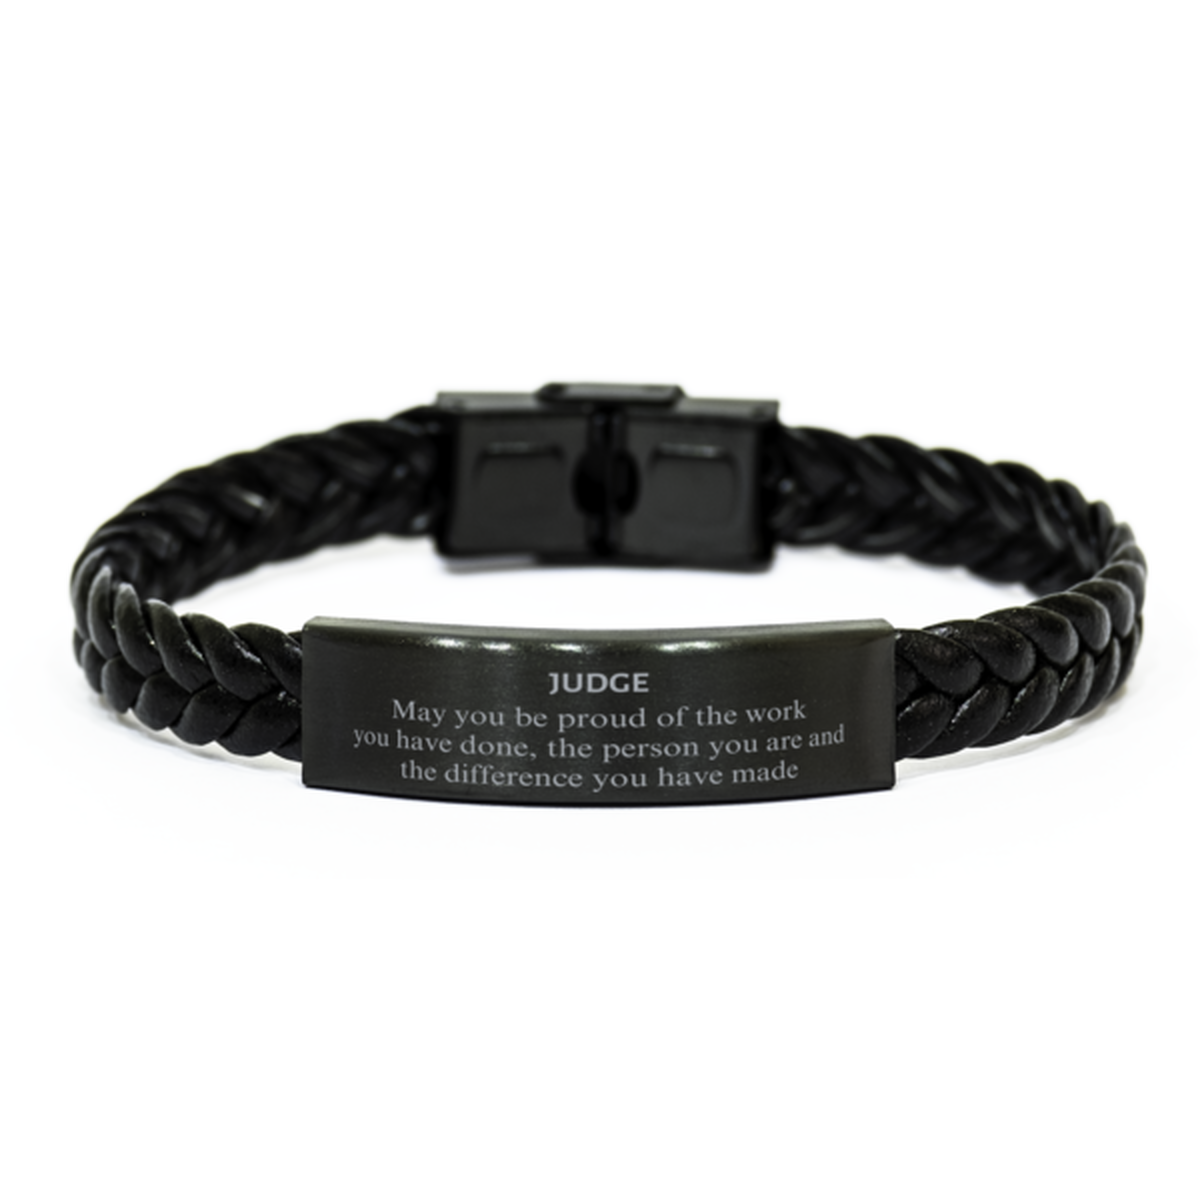 Judge May you be proud of the work you have done, Retirement Judge Braided Leather Bracelet for Colleague Appreciation Gifts Amazing for Judge